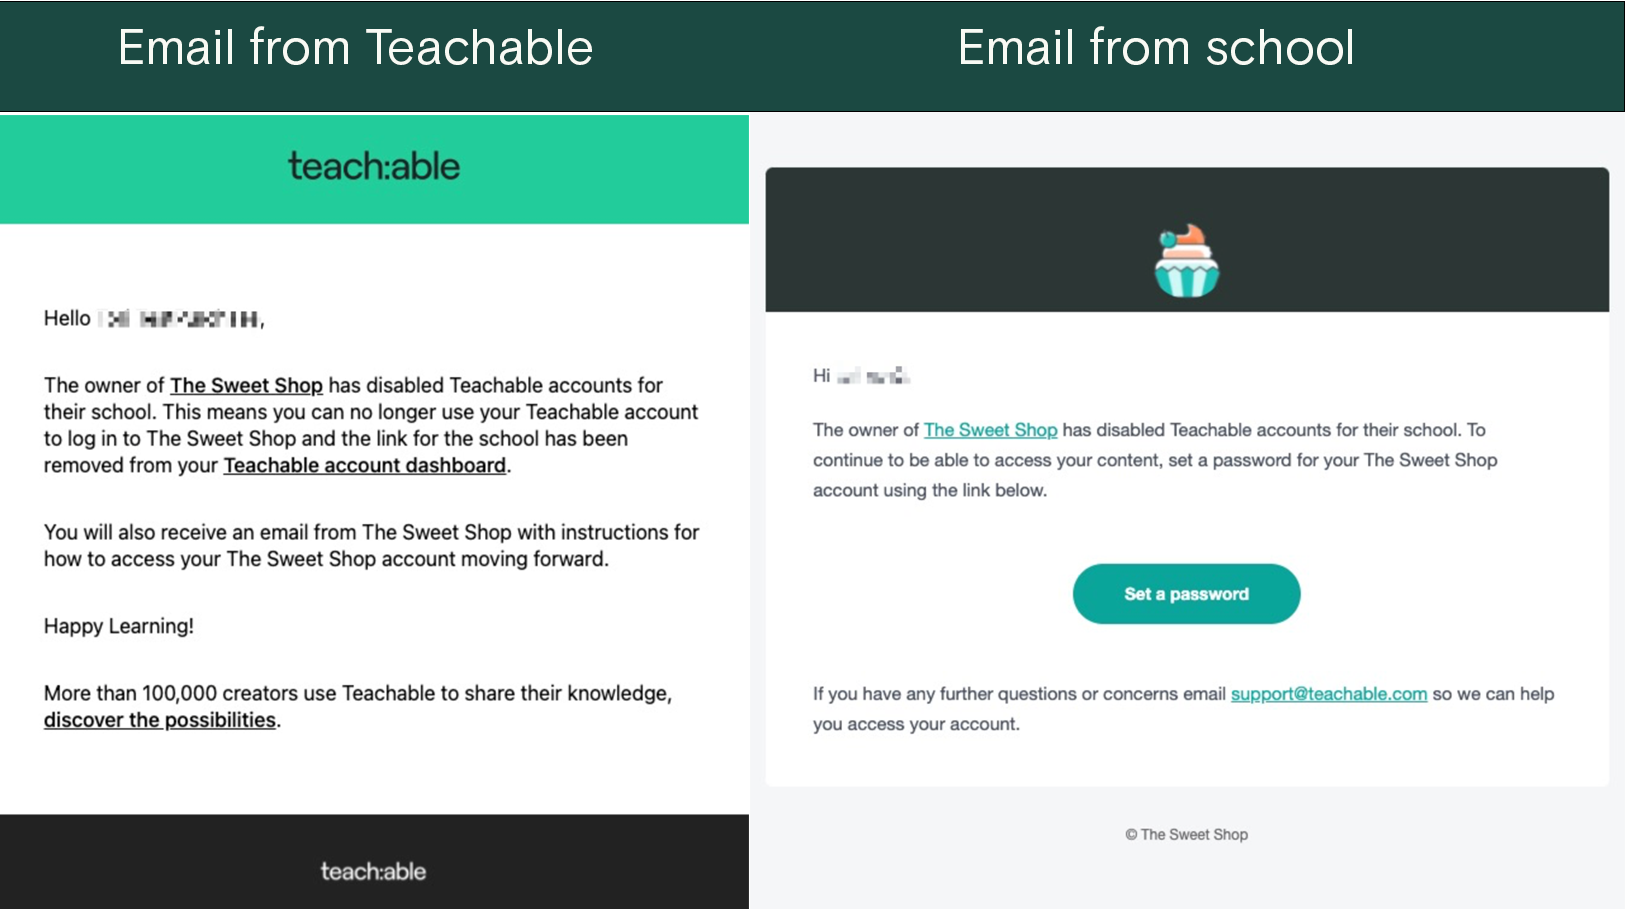 This is a graphic displaying two emails. On the left, there is an email from Teachable which states the following: The owner of SCHOOL NAME has disabled Teachable Accounts for their school. This means you can no longer use your Teachable Account to log in to SCHOOL NAME and the link for the school has been removed from your Teachable Account dashboard. You will also receive an email from SCHOOL NAME with instructions for how to access your SCHOOL NAME account moving forward. On the right side of the graphic, there is an email from the school which states the following: The owner of SCHOOL NAME has disabled Teachable Accounts for their school. To continue to be able to access your content, set a password for your SCHOOL NAME account using the link below.